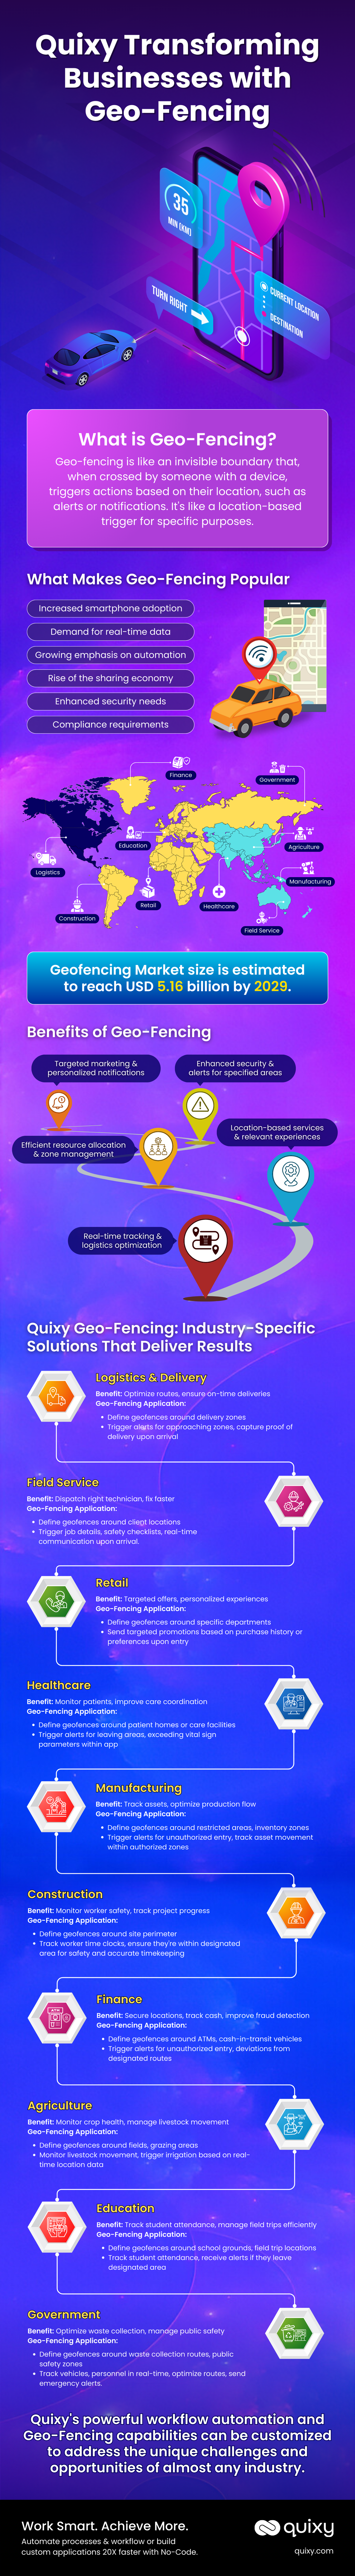 Quixy's geo-fencing feature